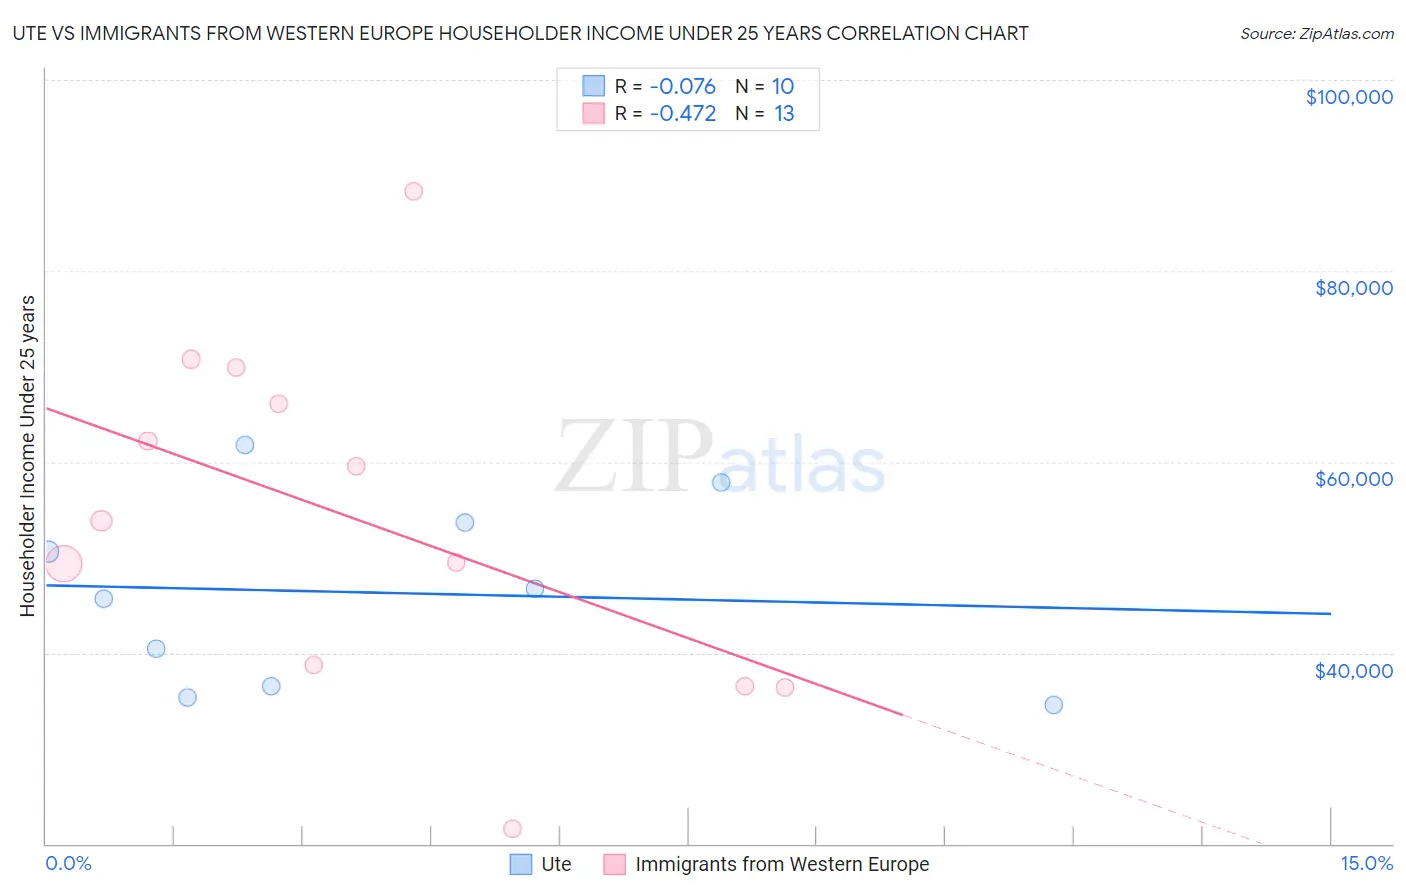 Ute vs Immigrants from Western Europe Householder Income Under 25 years